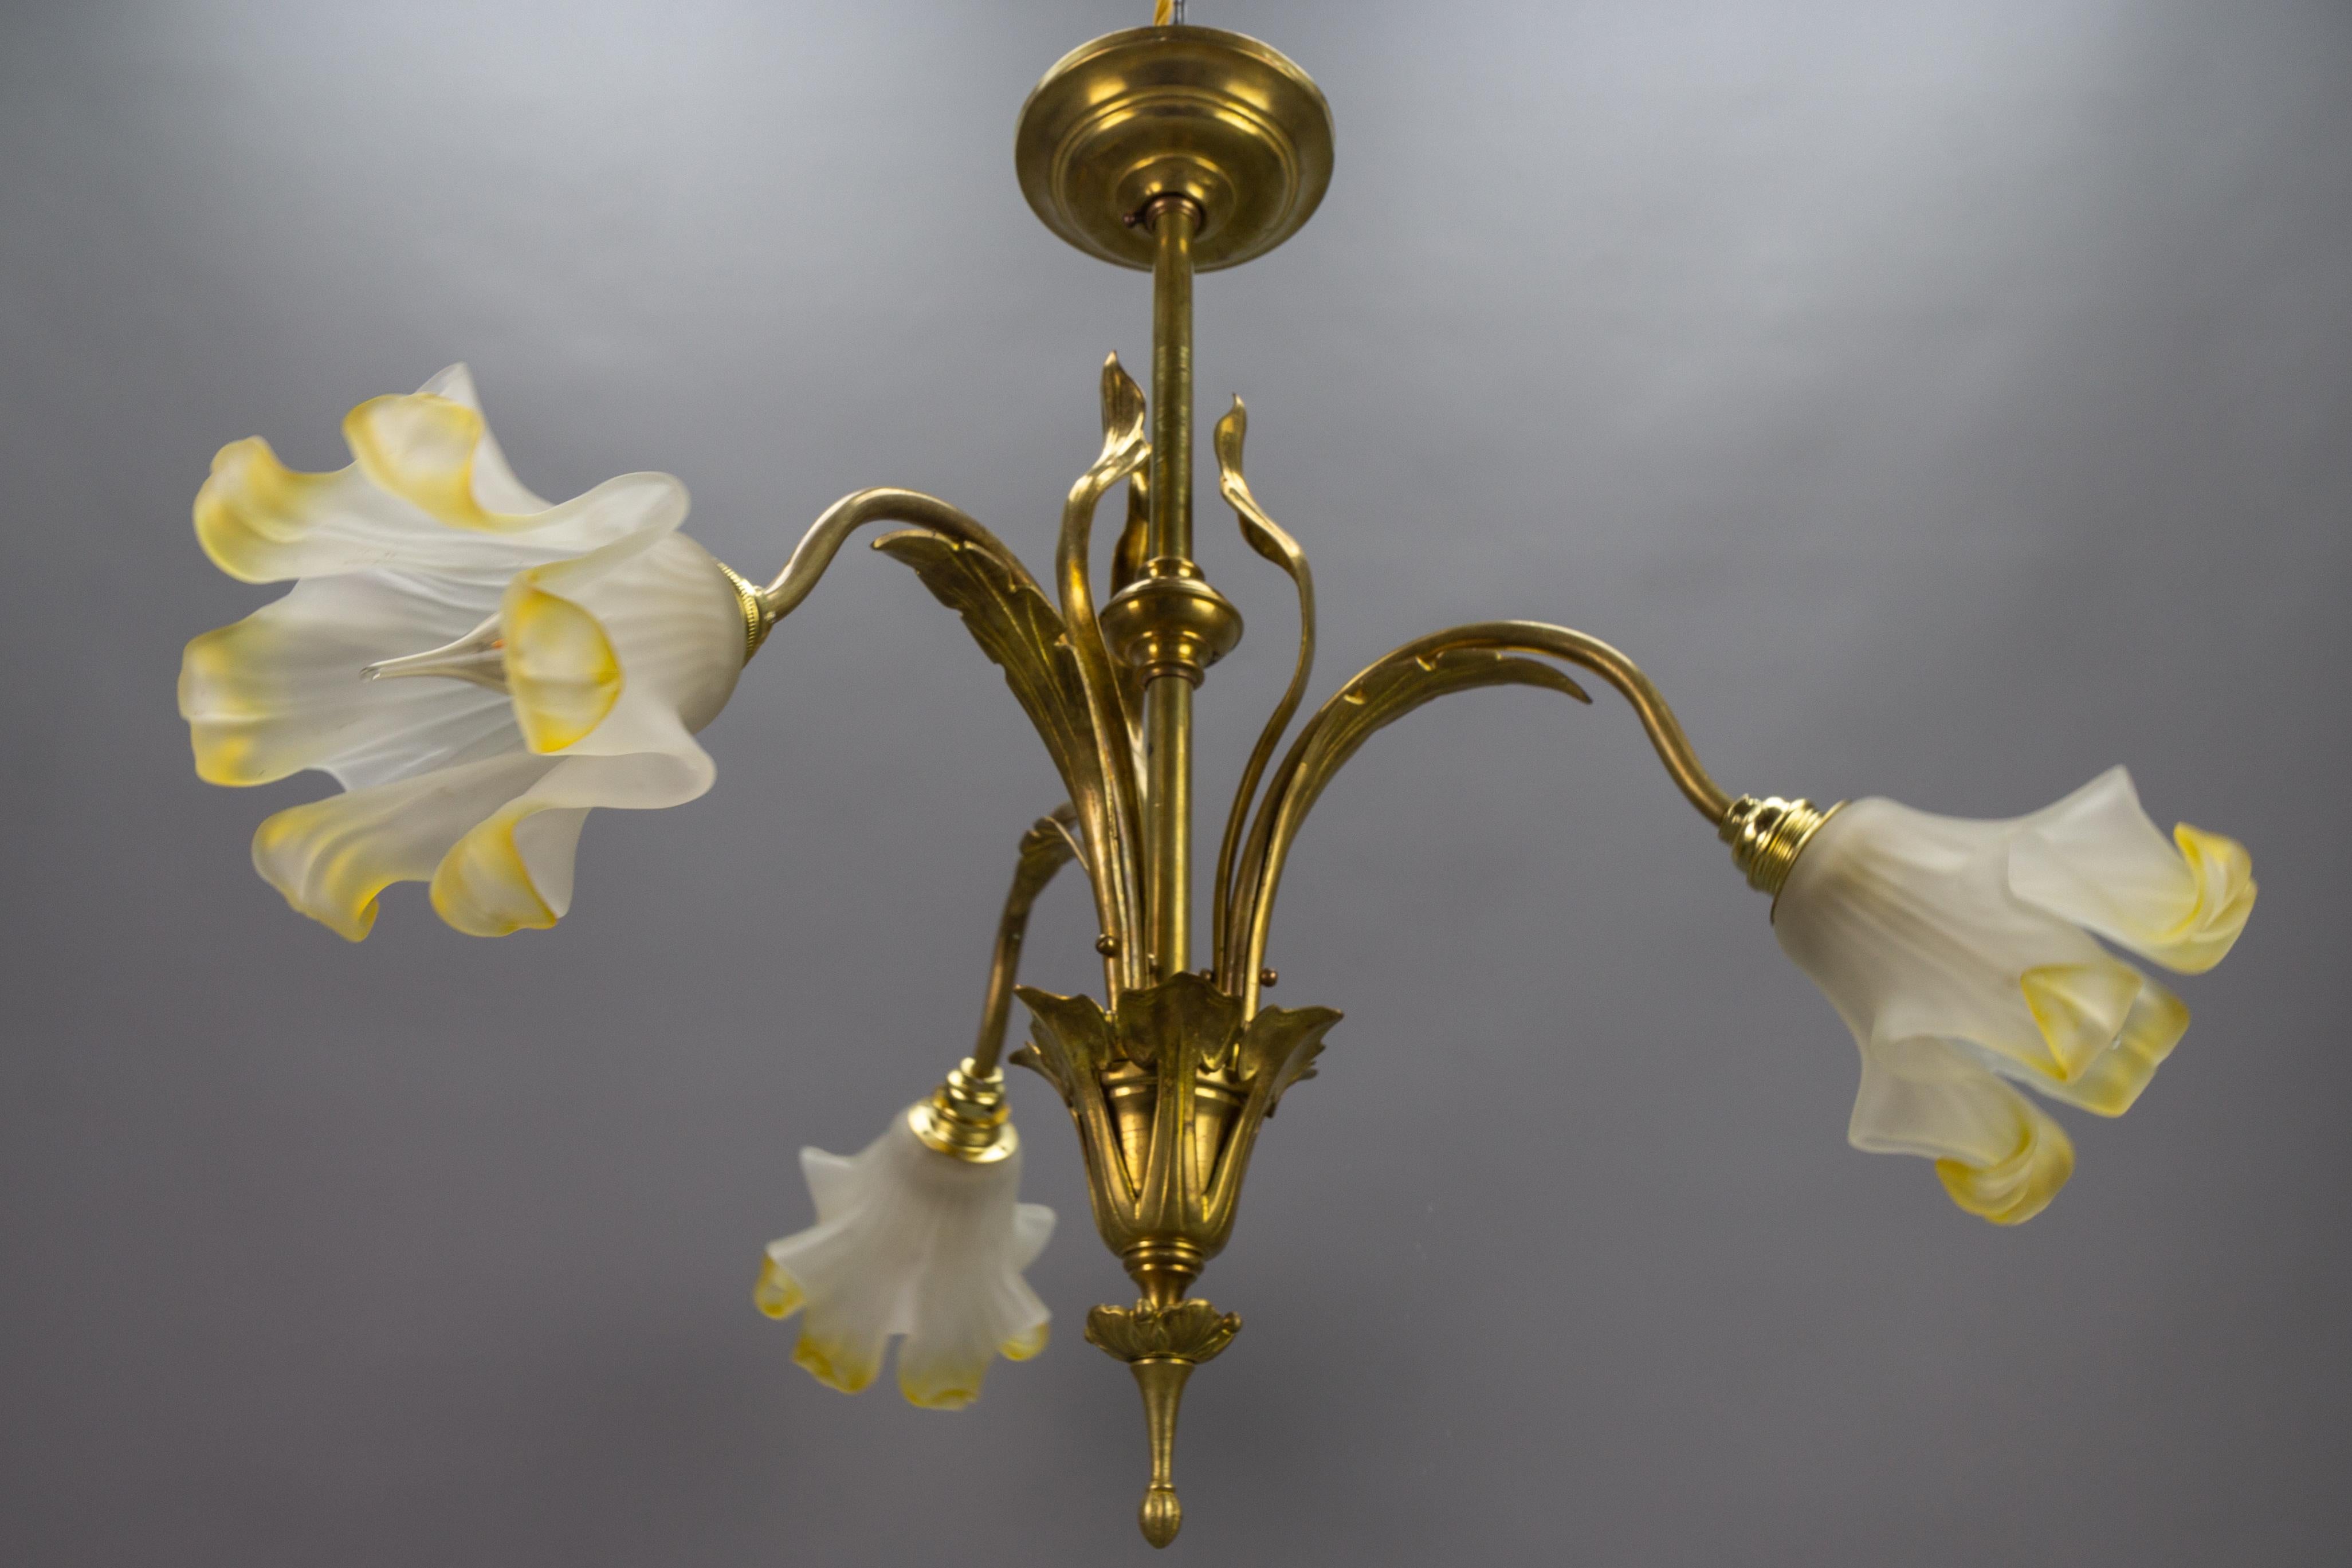 French Art Nouveau brass and glass three-light iris-shaped chandelier, from ca. 1910s.
This absolutely adorable Art Nouveau period brass chandelier features three white and light yellow colored iris-flower-shaped Pâte de Verre glass lampshades and